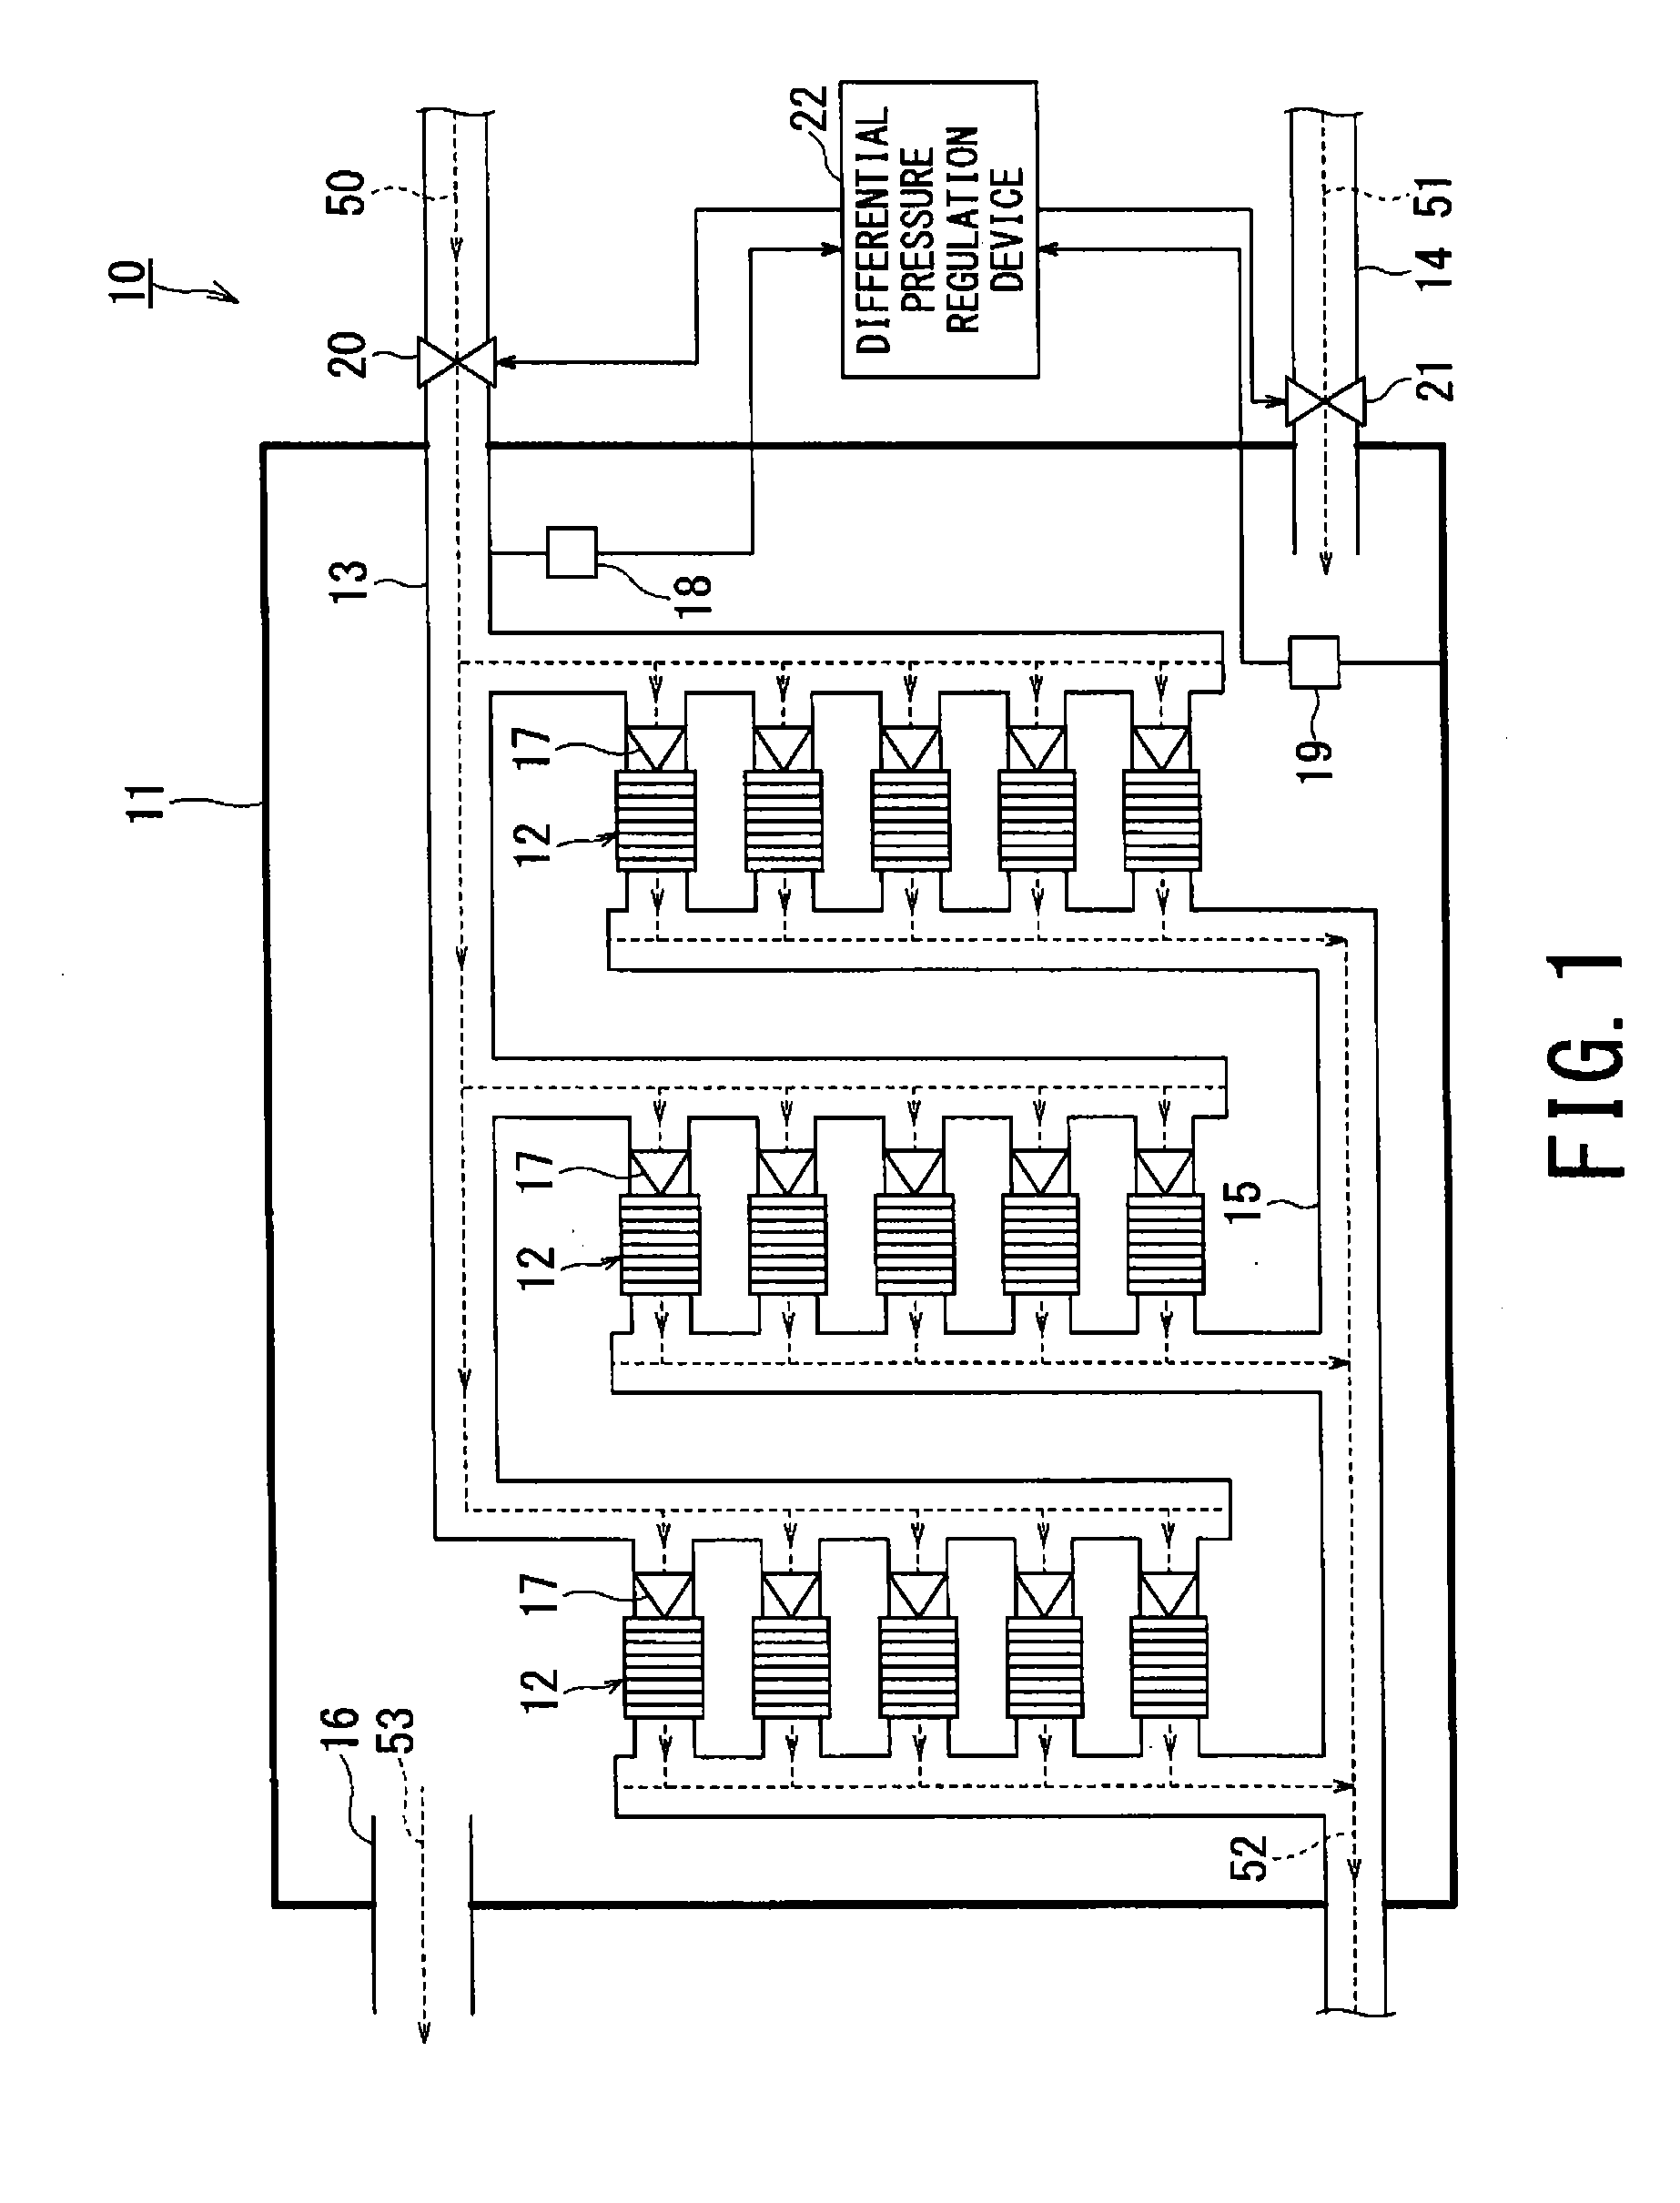 Hydrogen production system and method for producing hydrogen